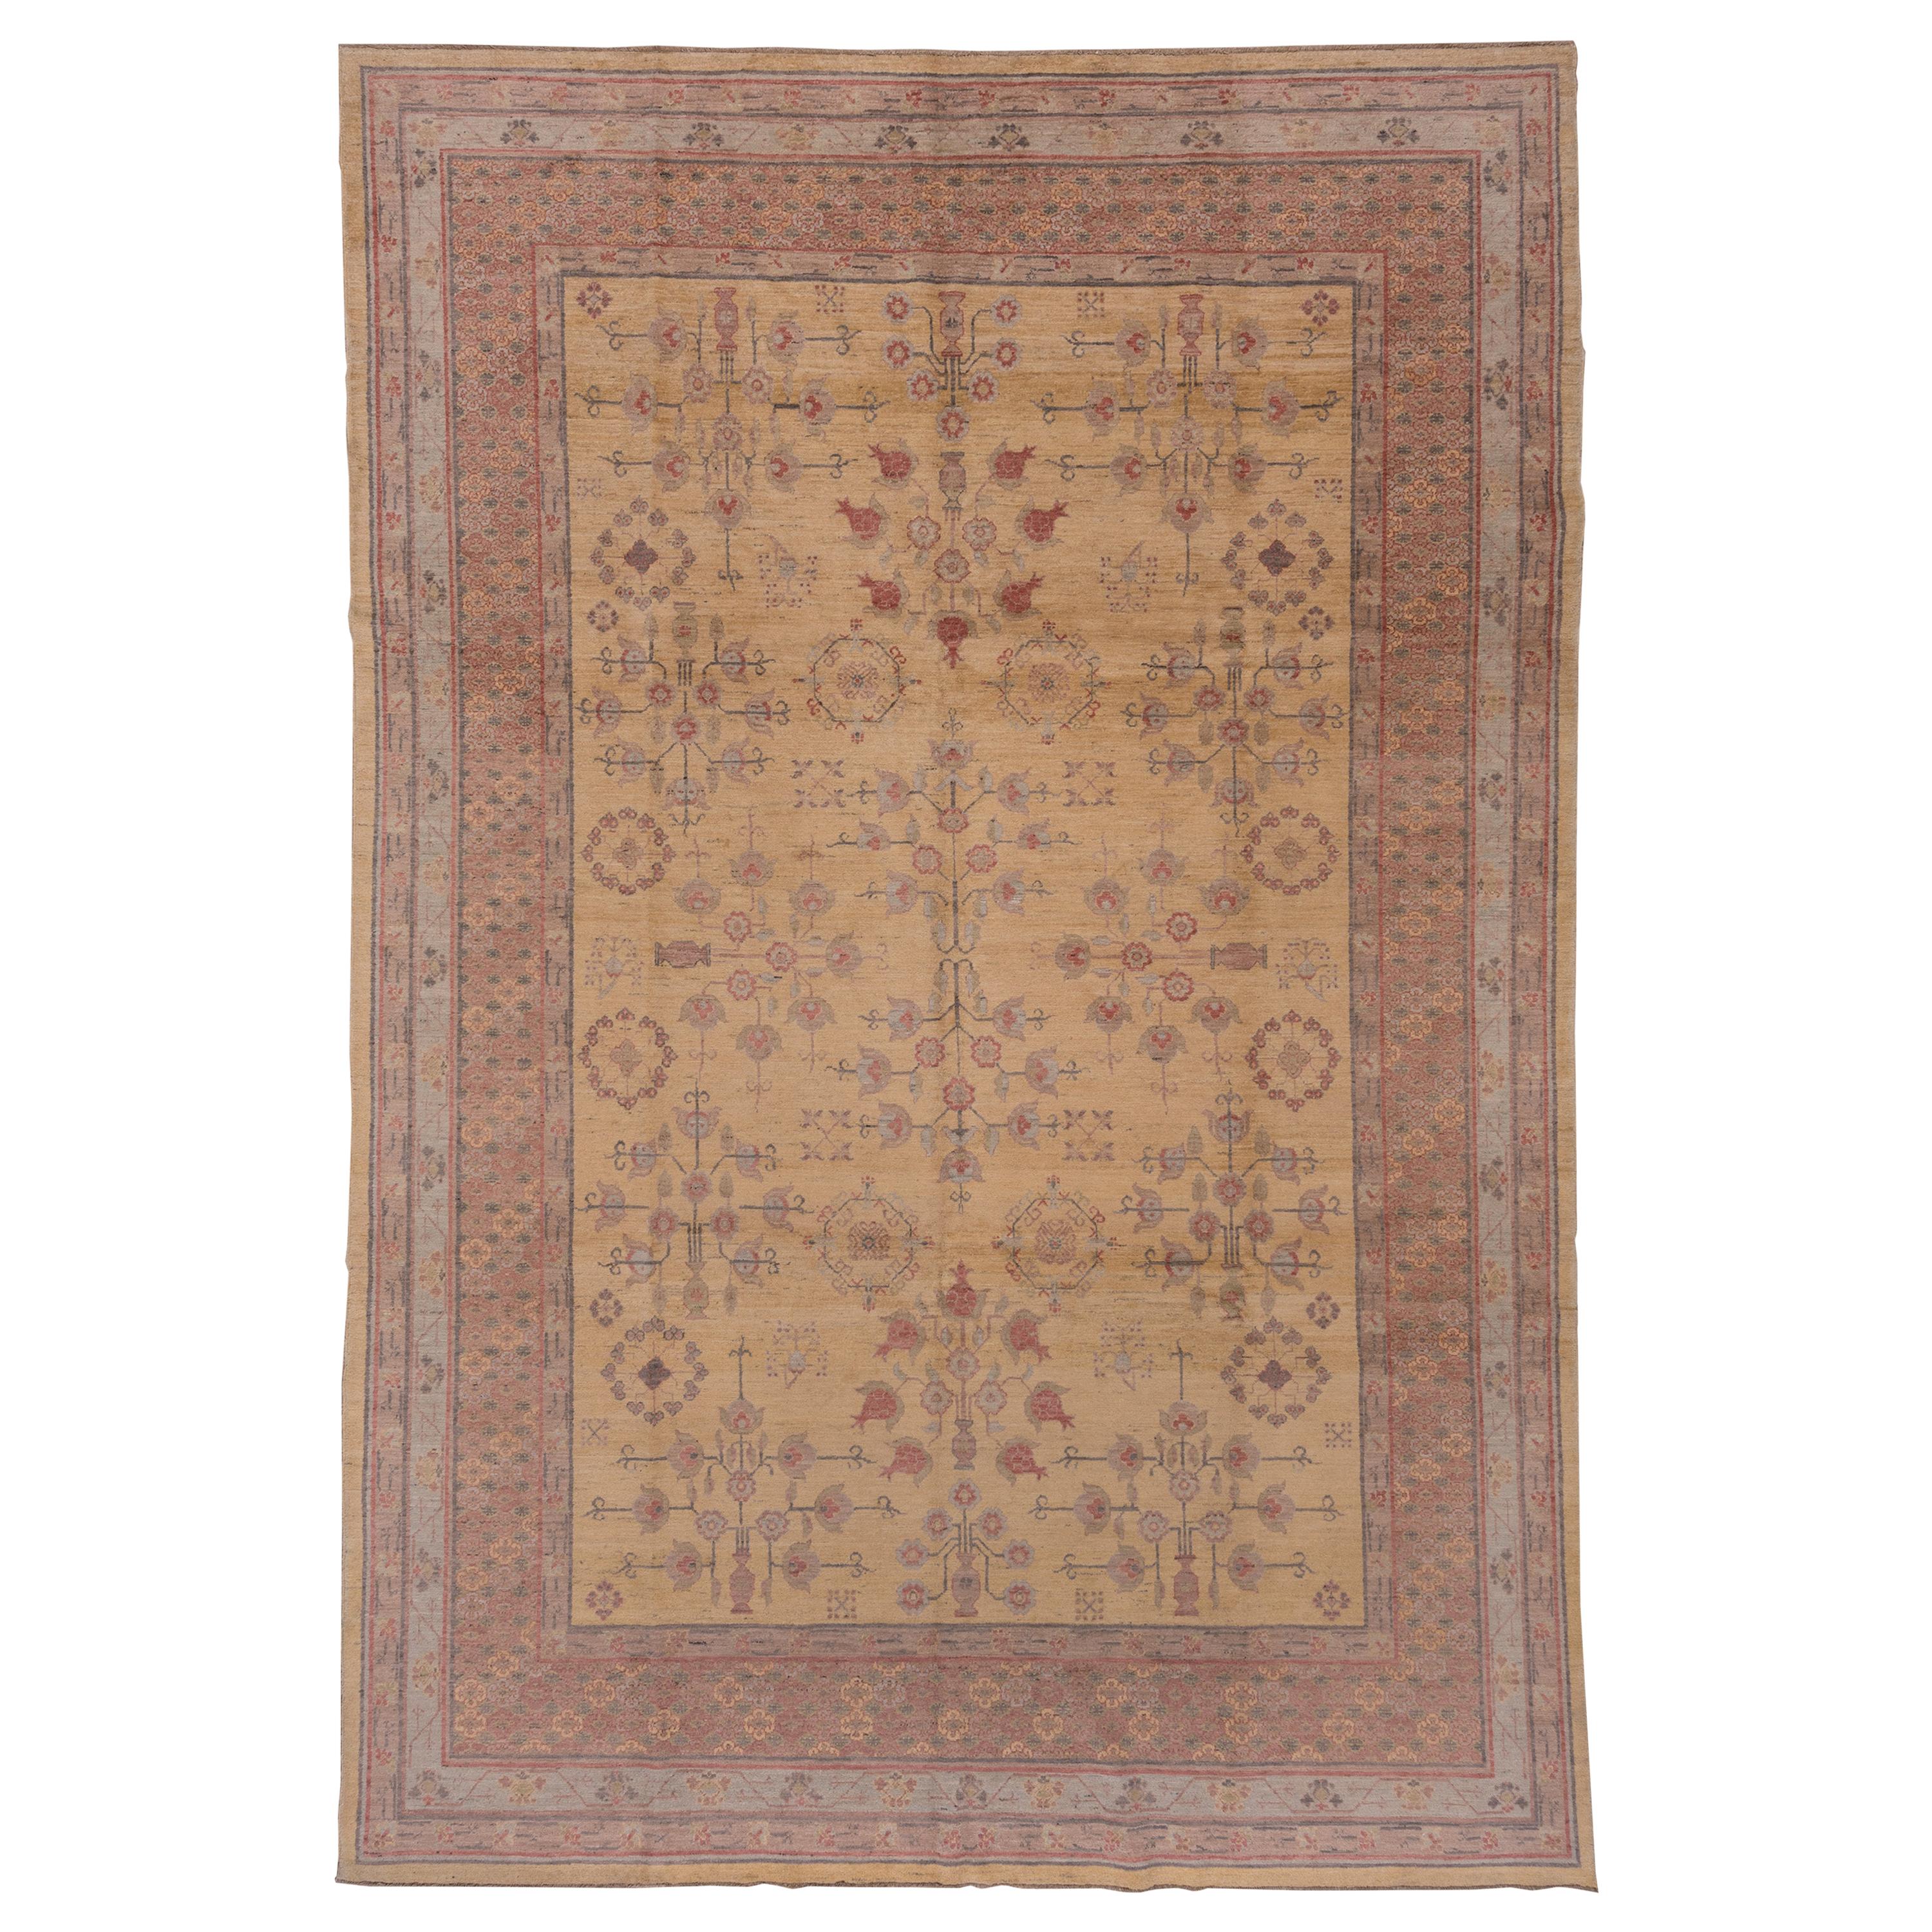 Khotan Design Rug, Yellow Field, Colorful Border, Pink Blue and Purple Accents For Sale